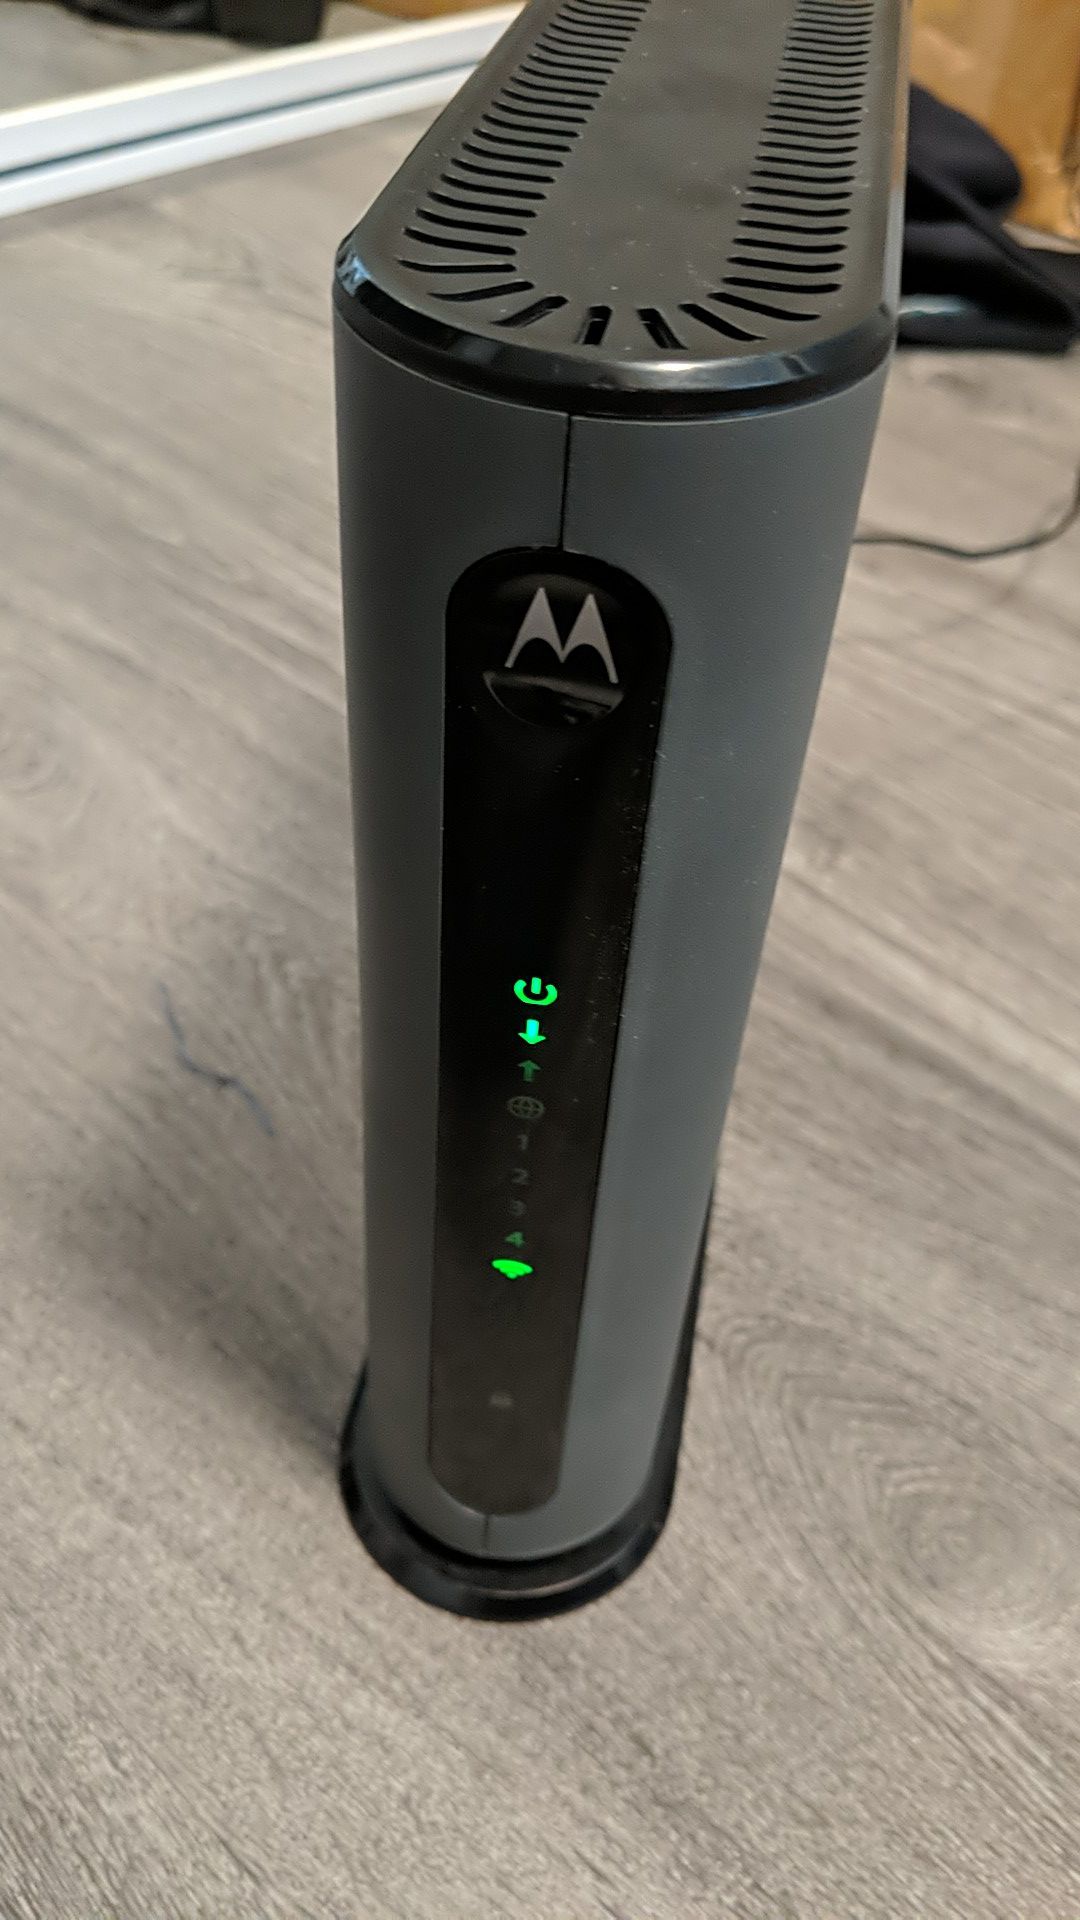 Motorola Cable modem + wireless router